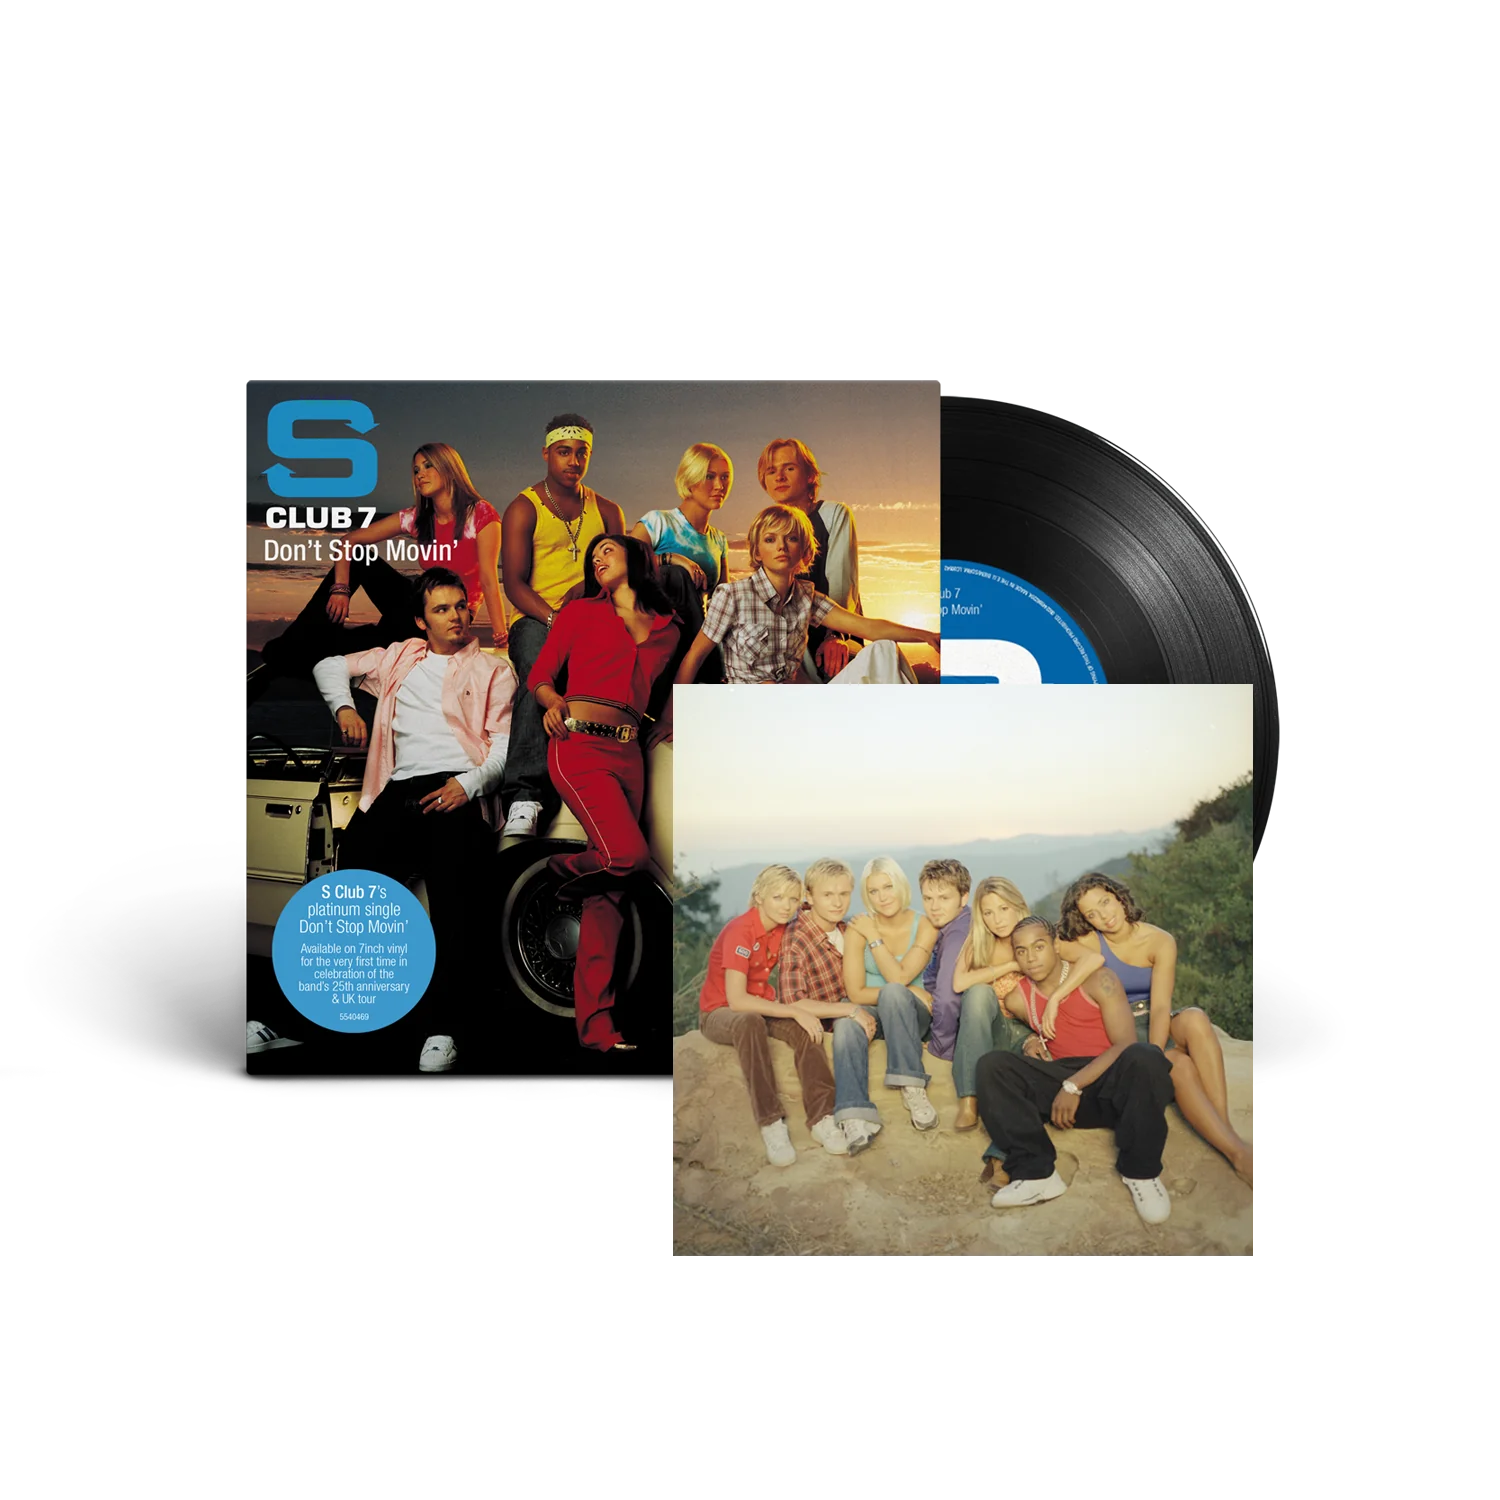 Don't Stop Movin': Exclusive Vinyl 7" Single + Limited Edition Art Card